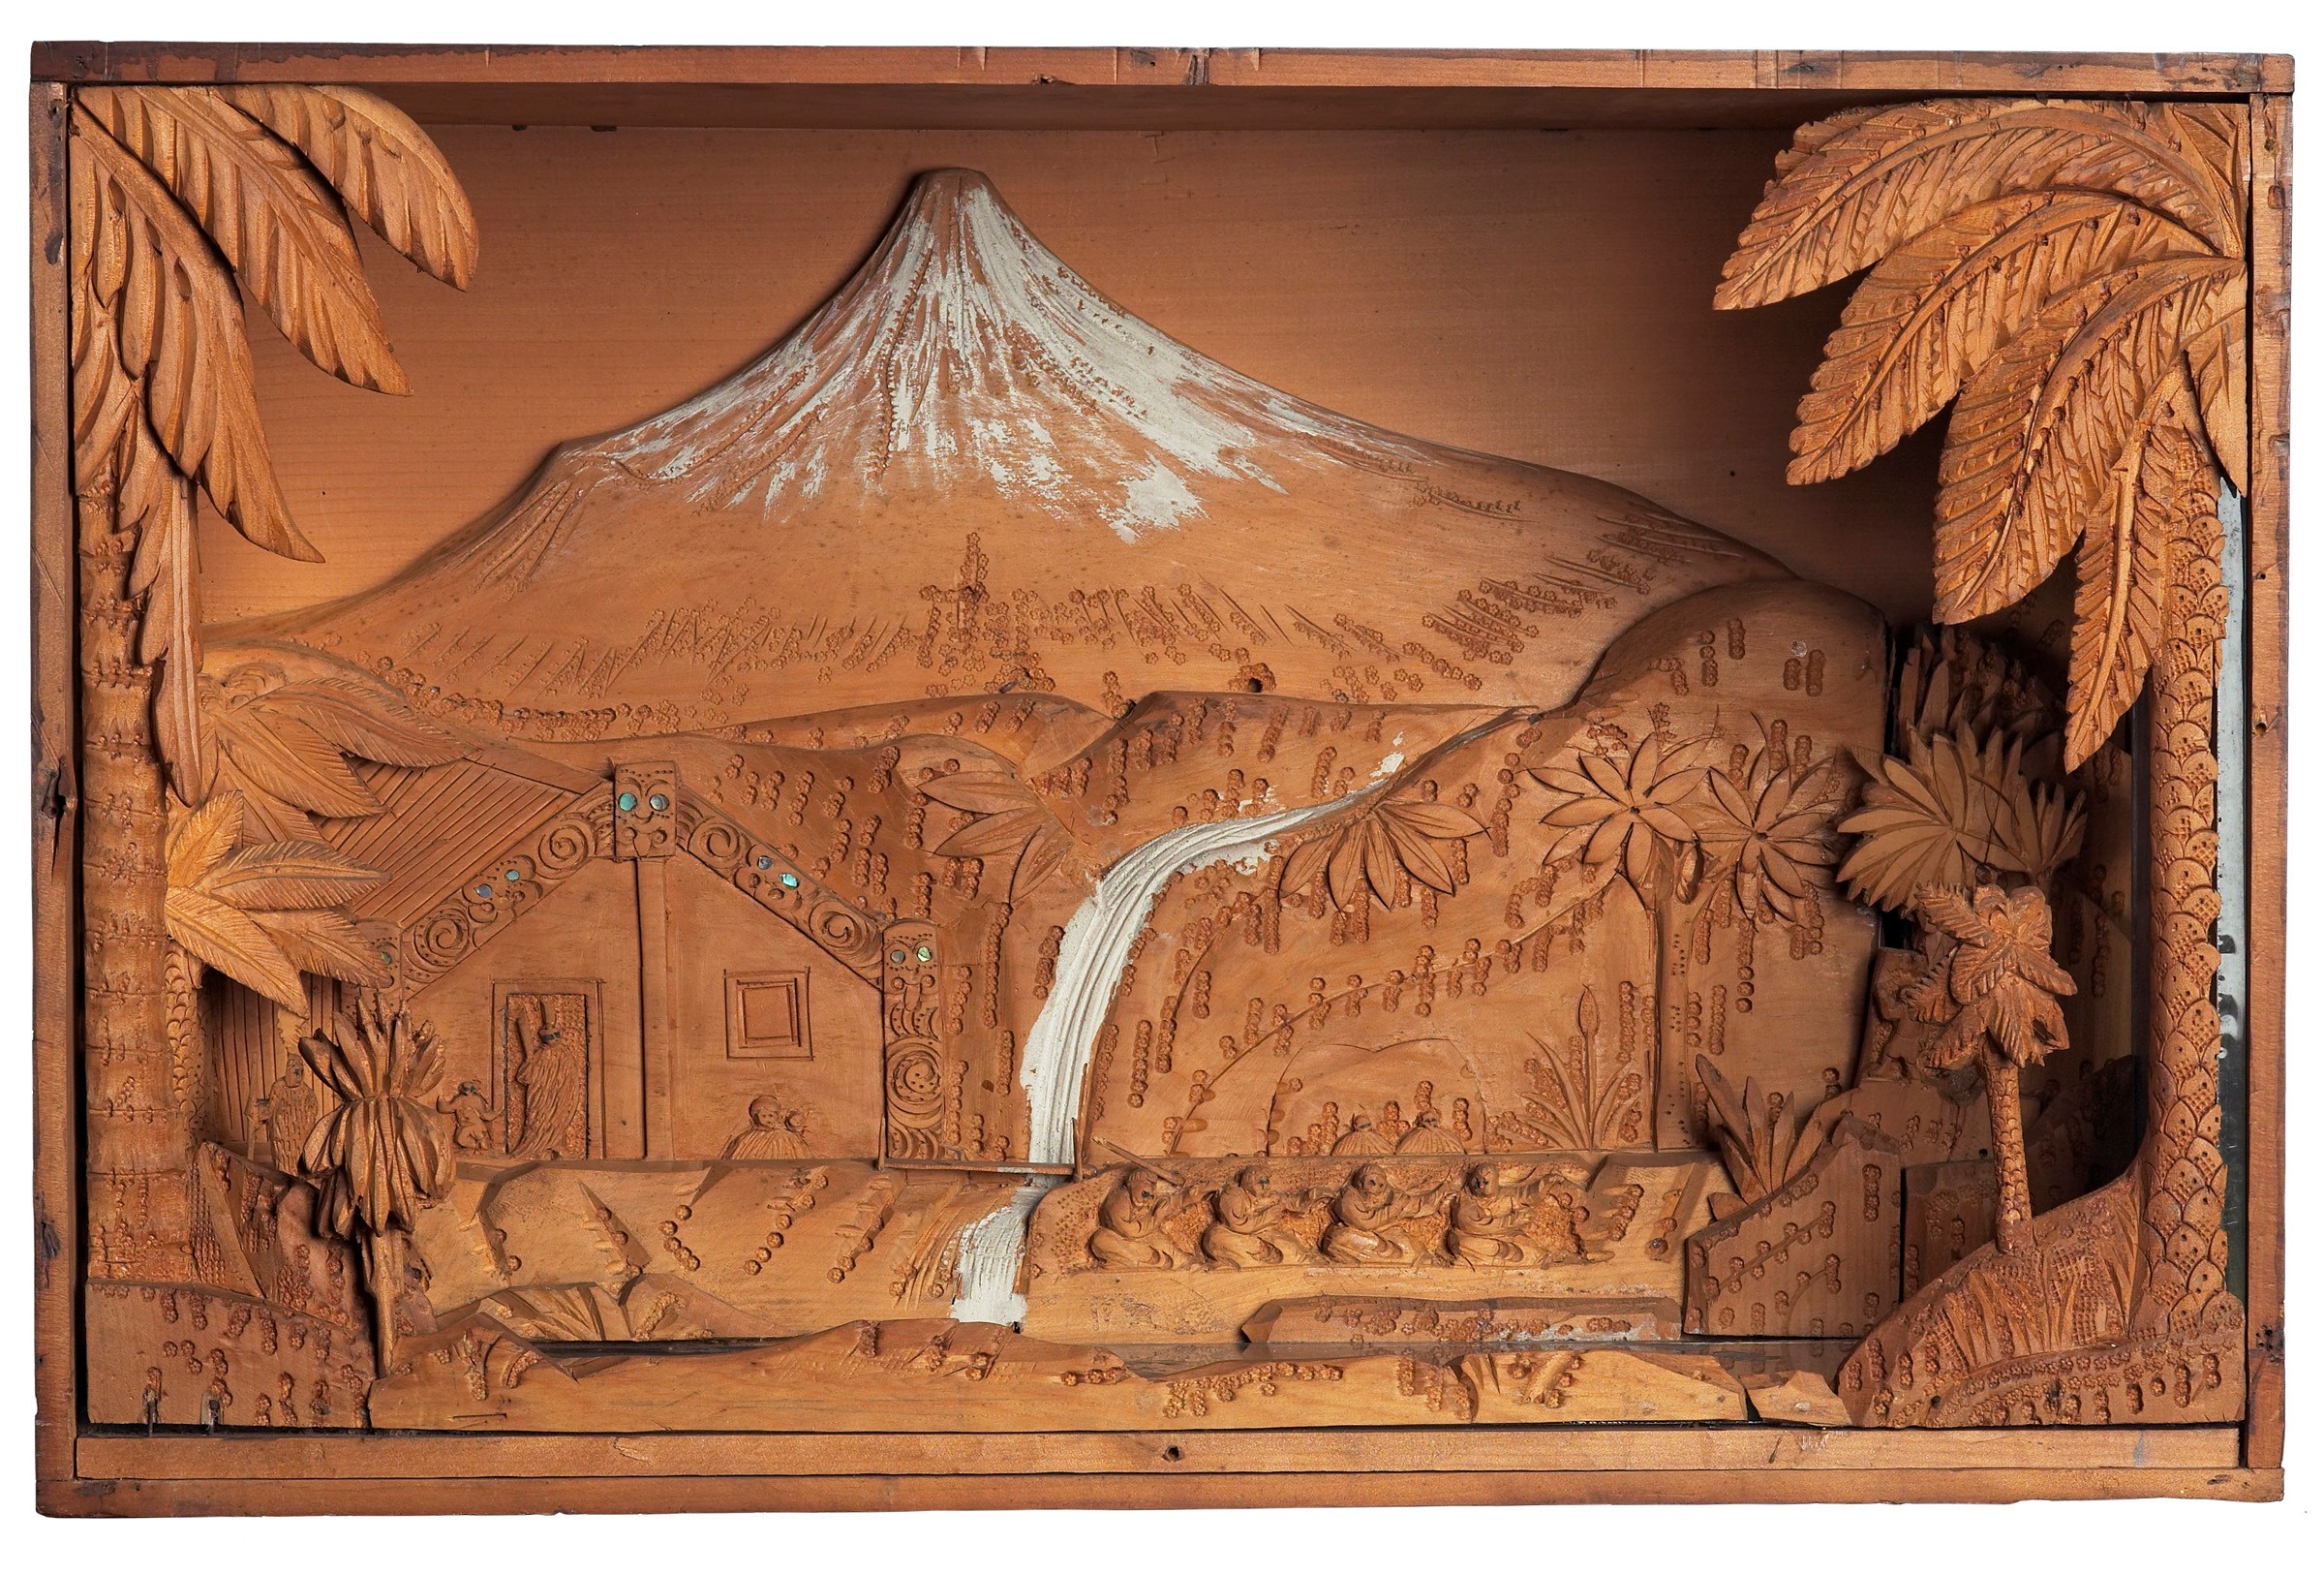 A carved wooden diorama showing Taranaki maunga in the background and a wharenui in the foreground.